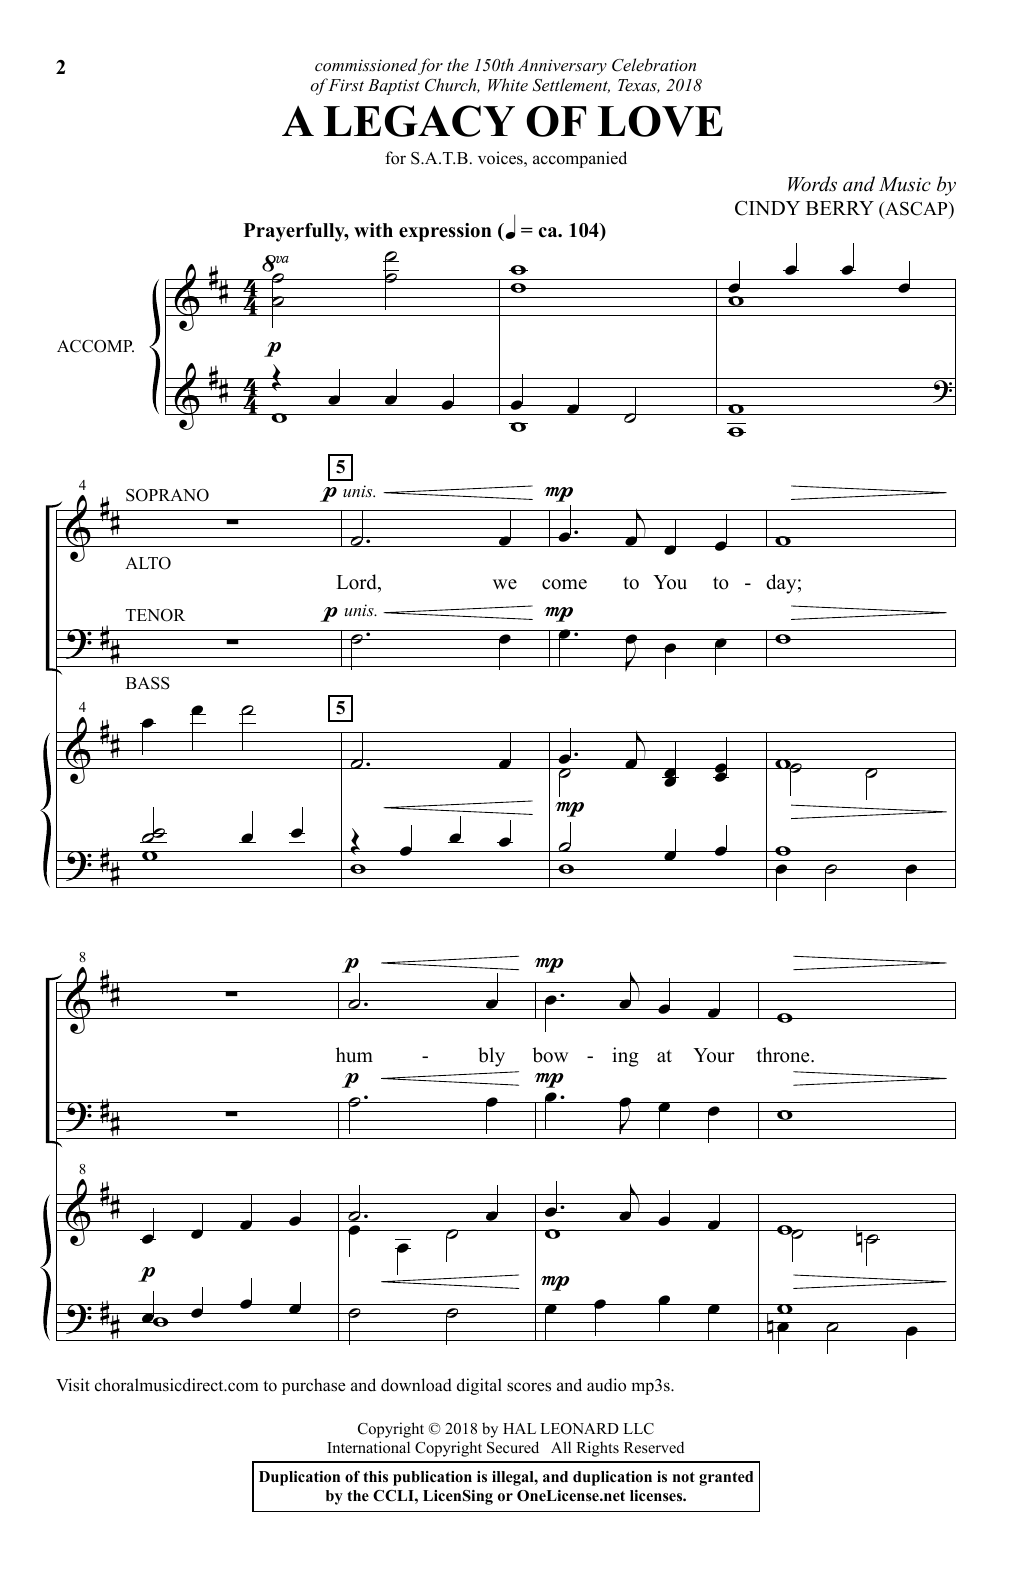 Download Cindy Berry A Legacy Of Love Sheet Music